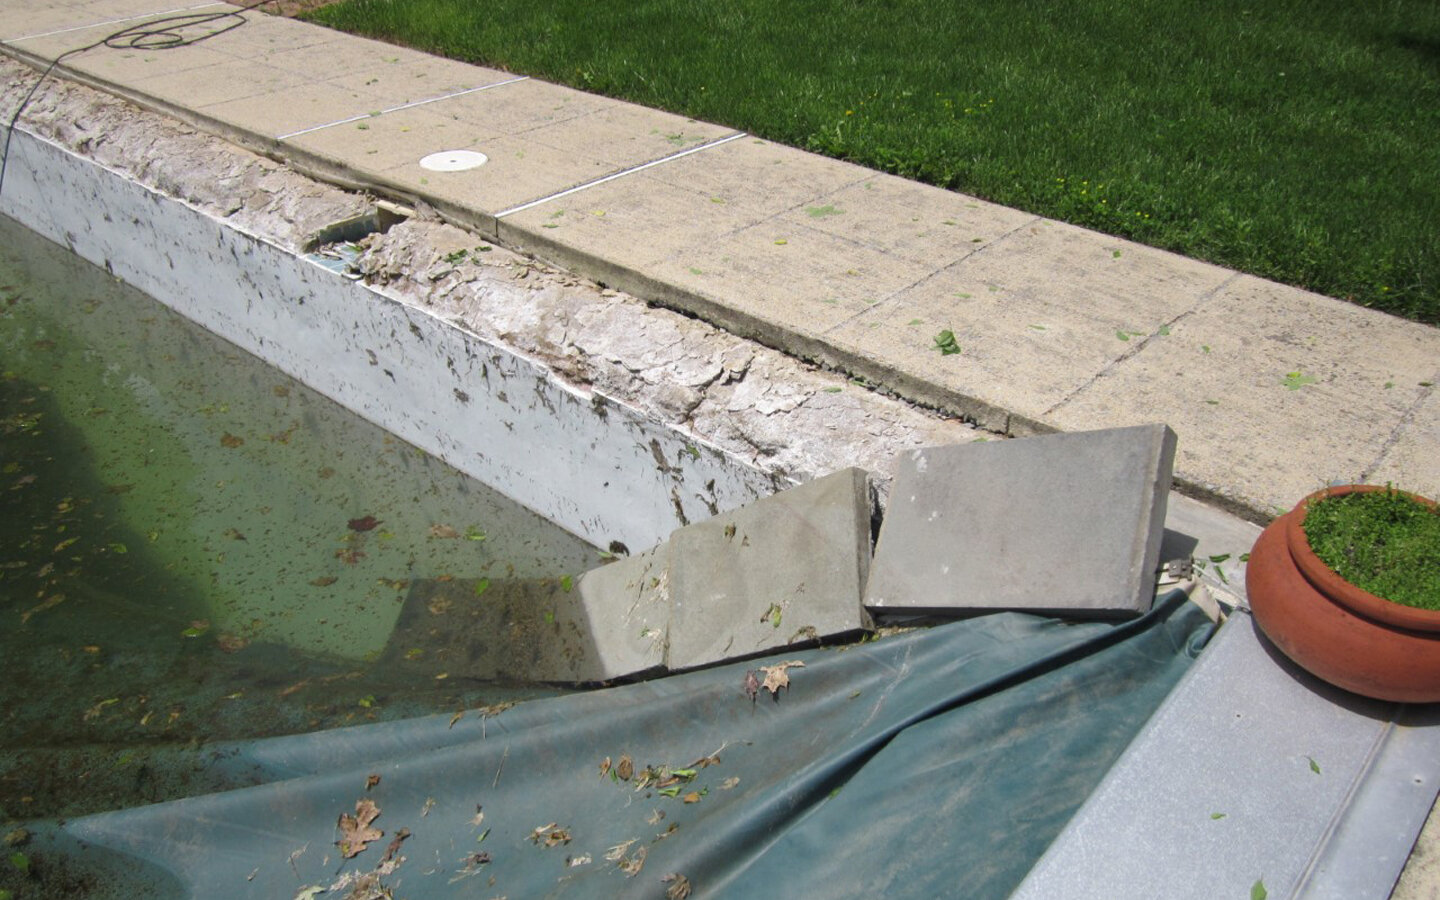  Here is another example of structural beam failure caused by damaged waterline tile. Because the tile was left in disrepair, over time the bond beam became saturated. Once the bond beam is saturated and the winter weather kicks in with freezing temp